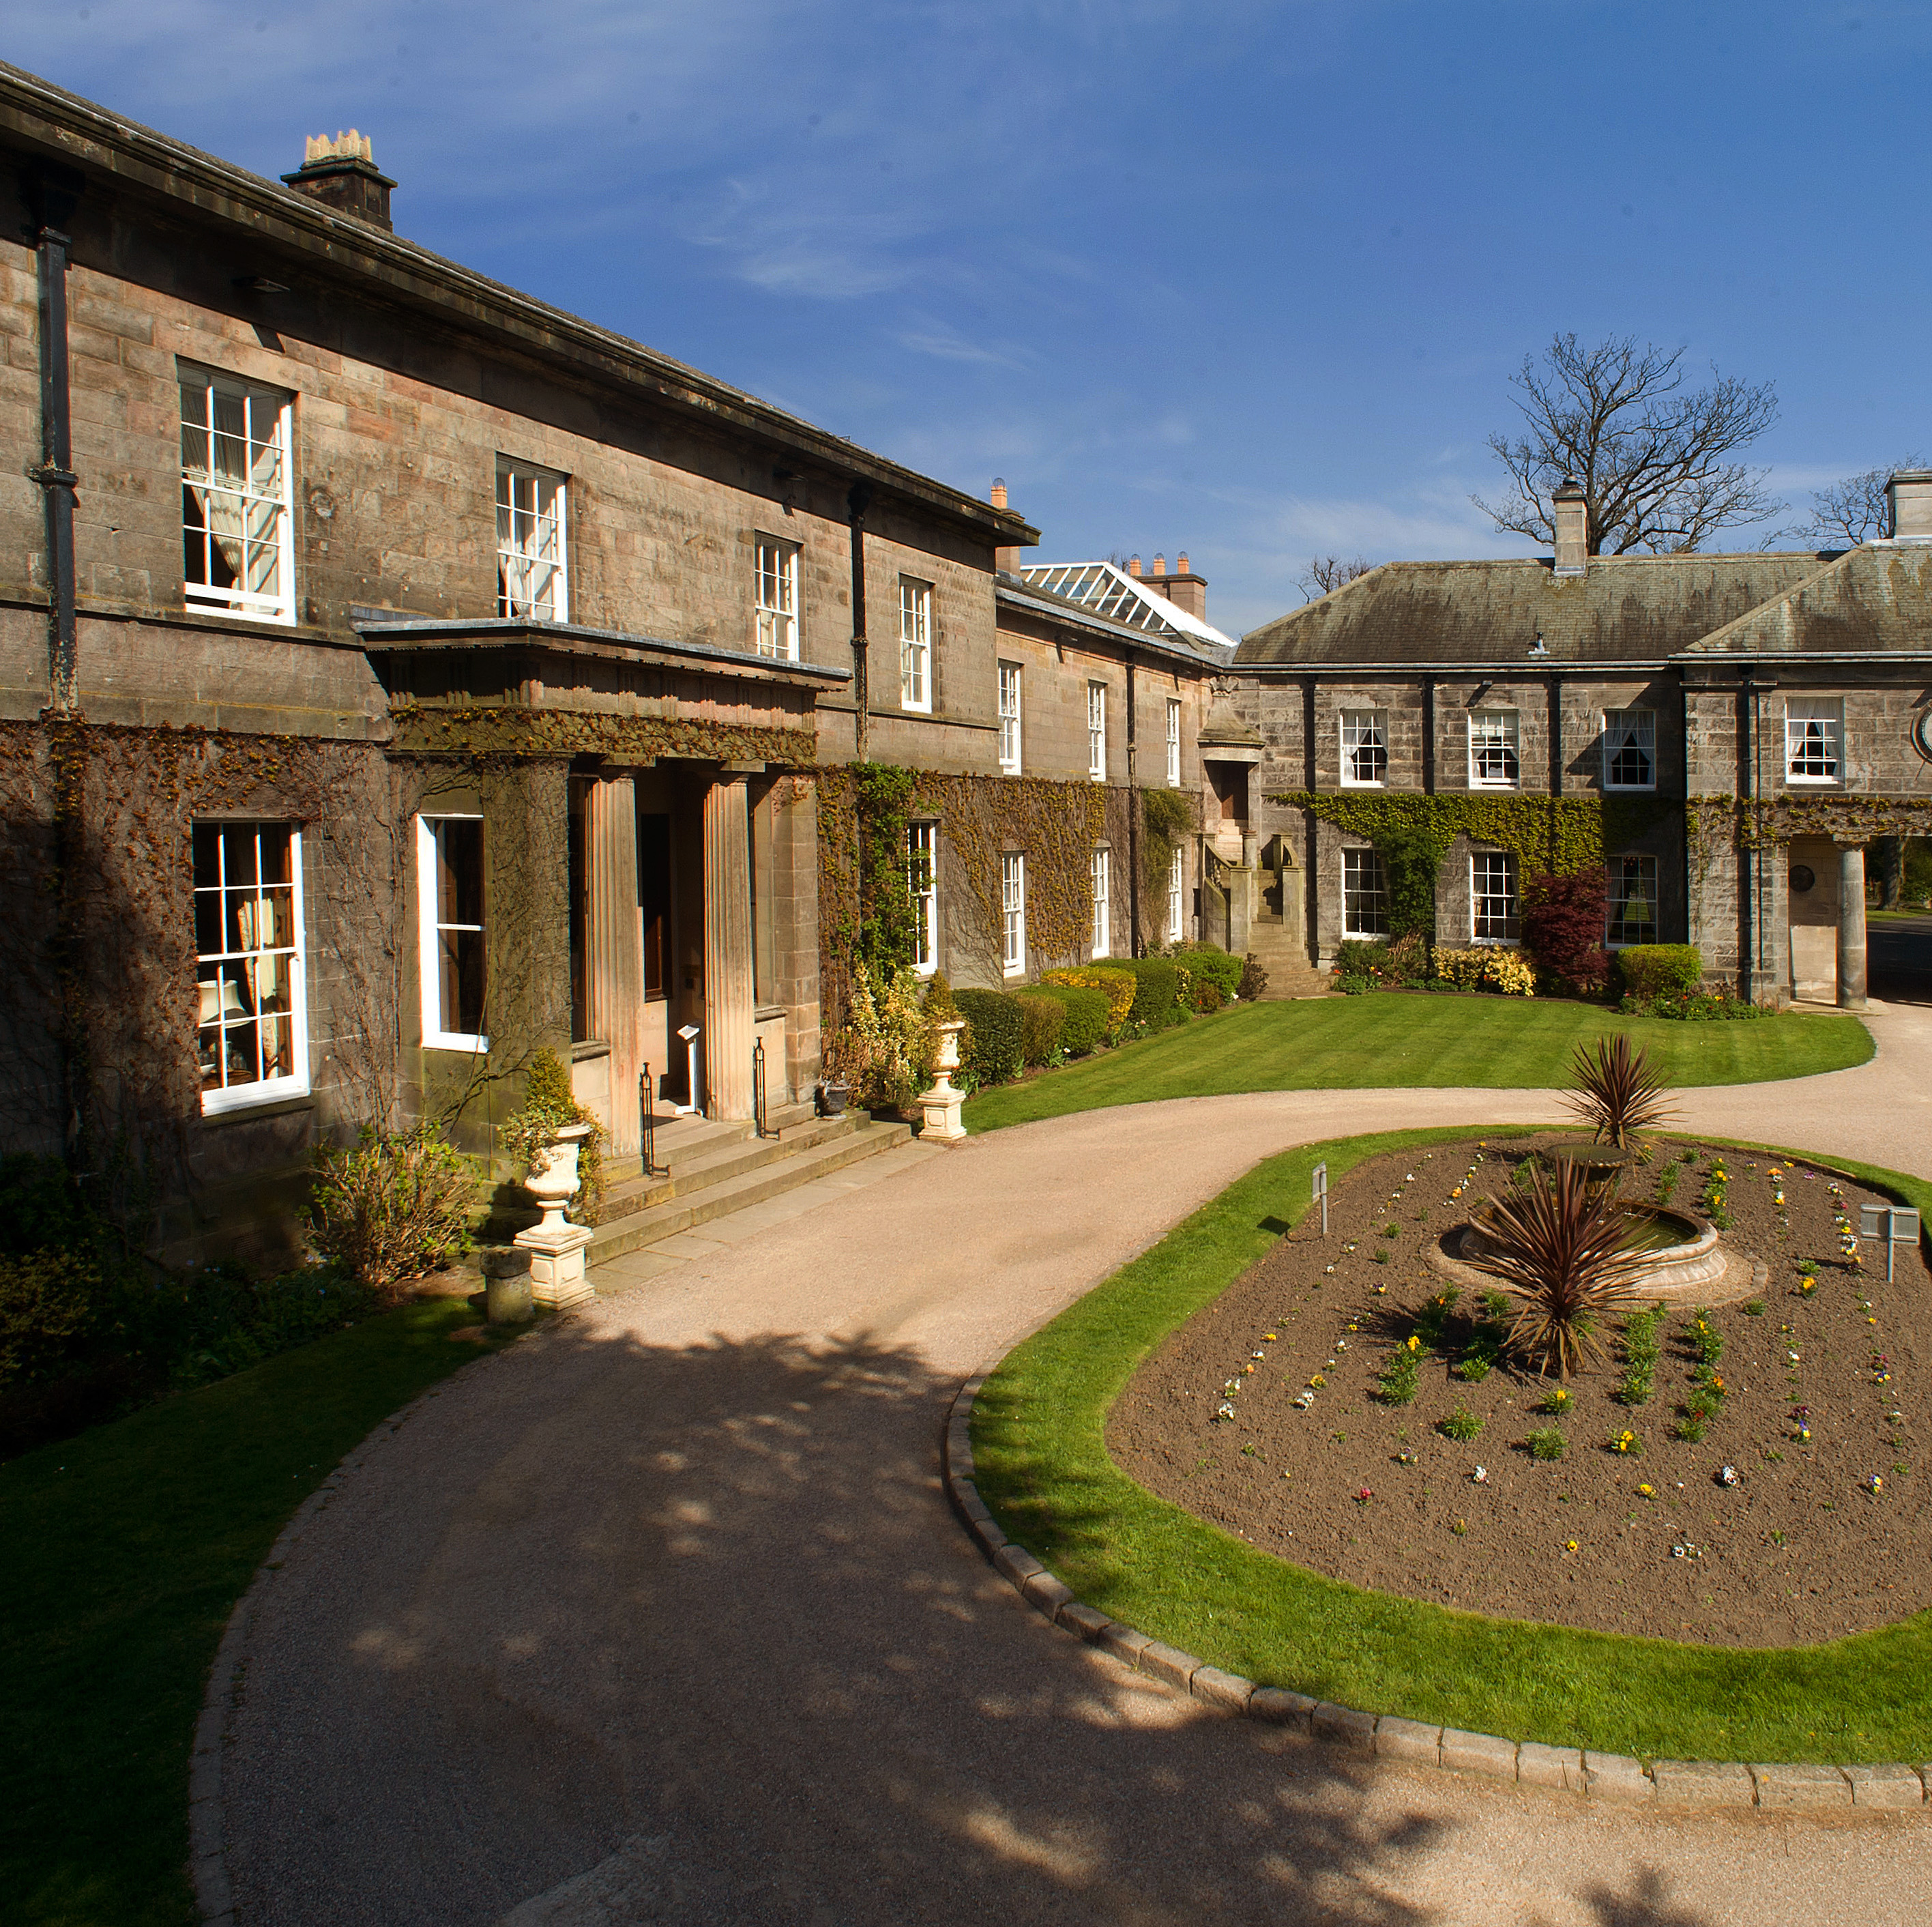 Doxford Hall, Doxford